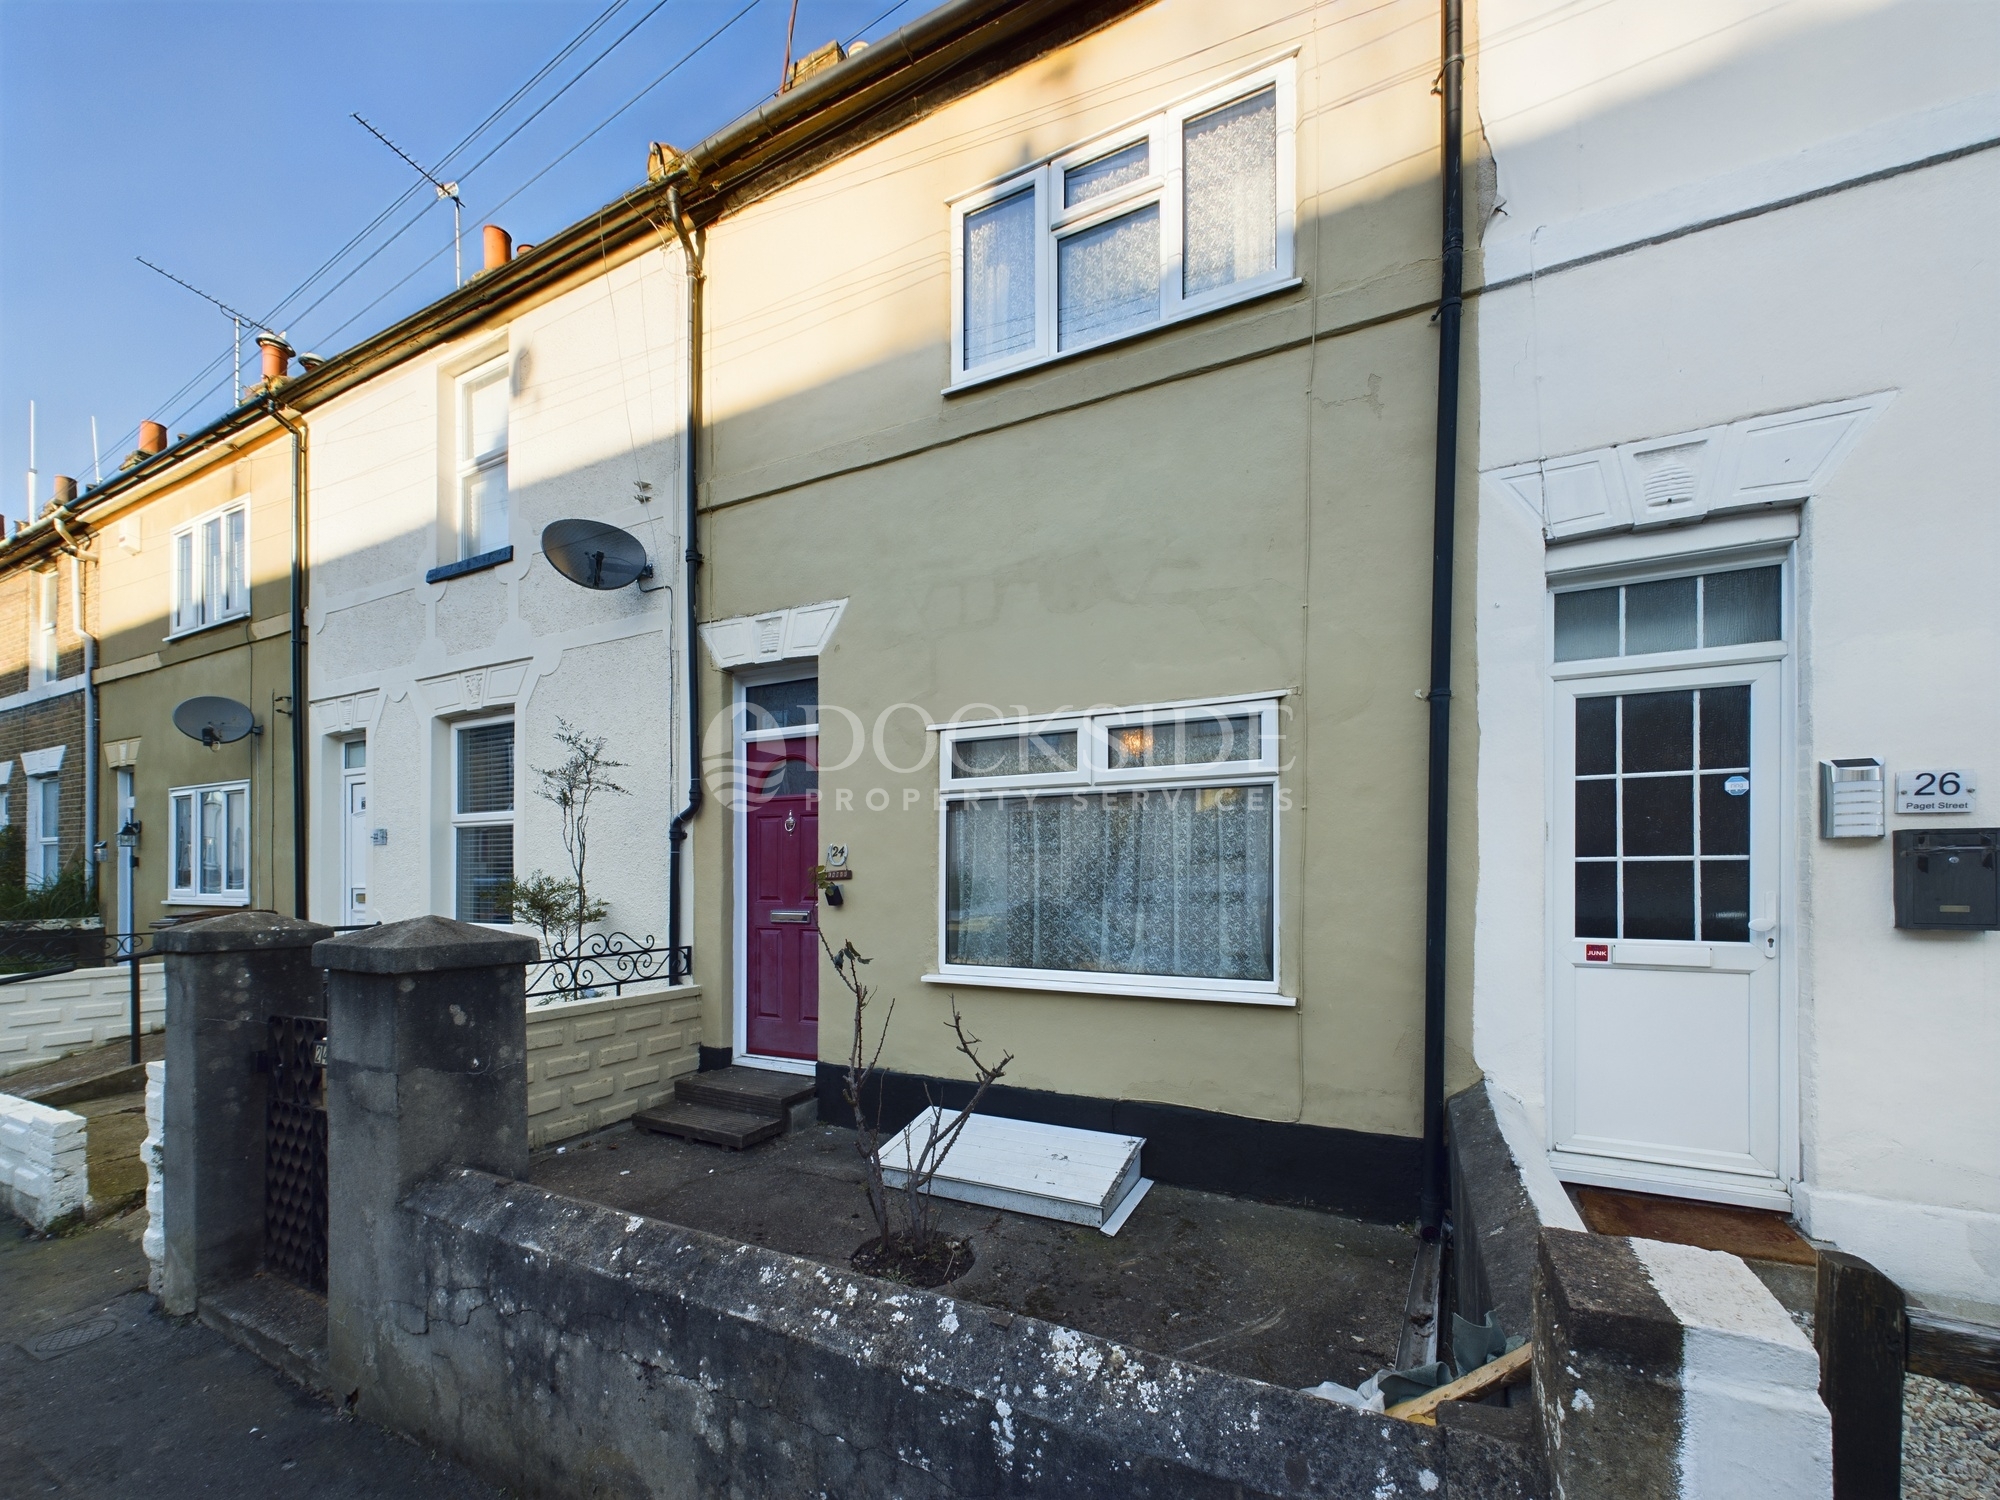 3 bed house for sale in Paget Street, Gillingham - Property Image 1